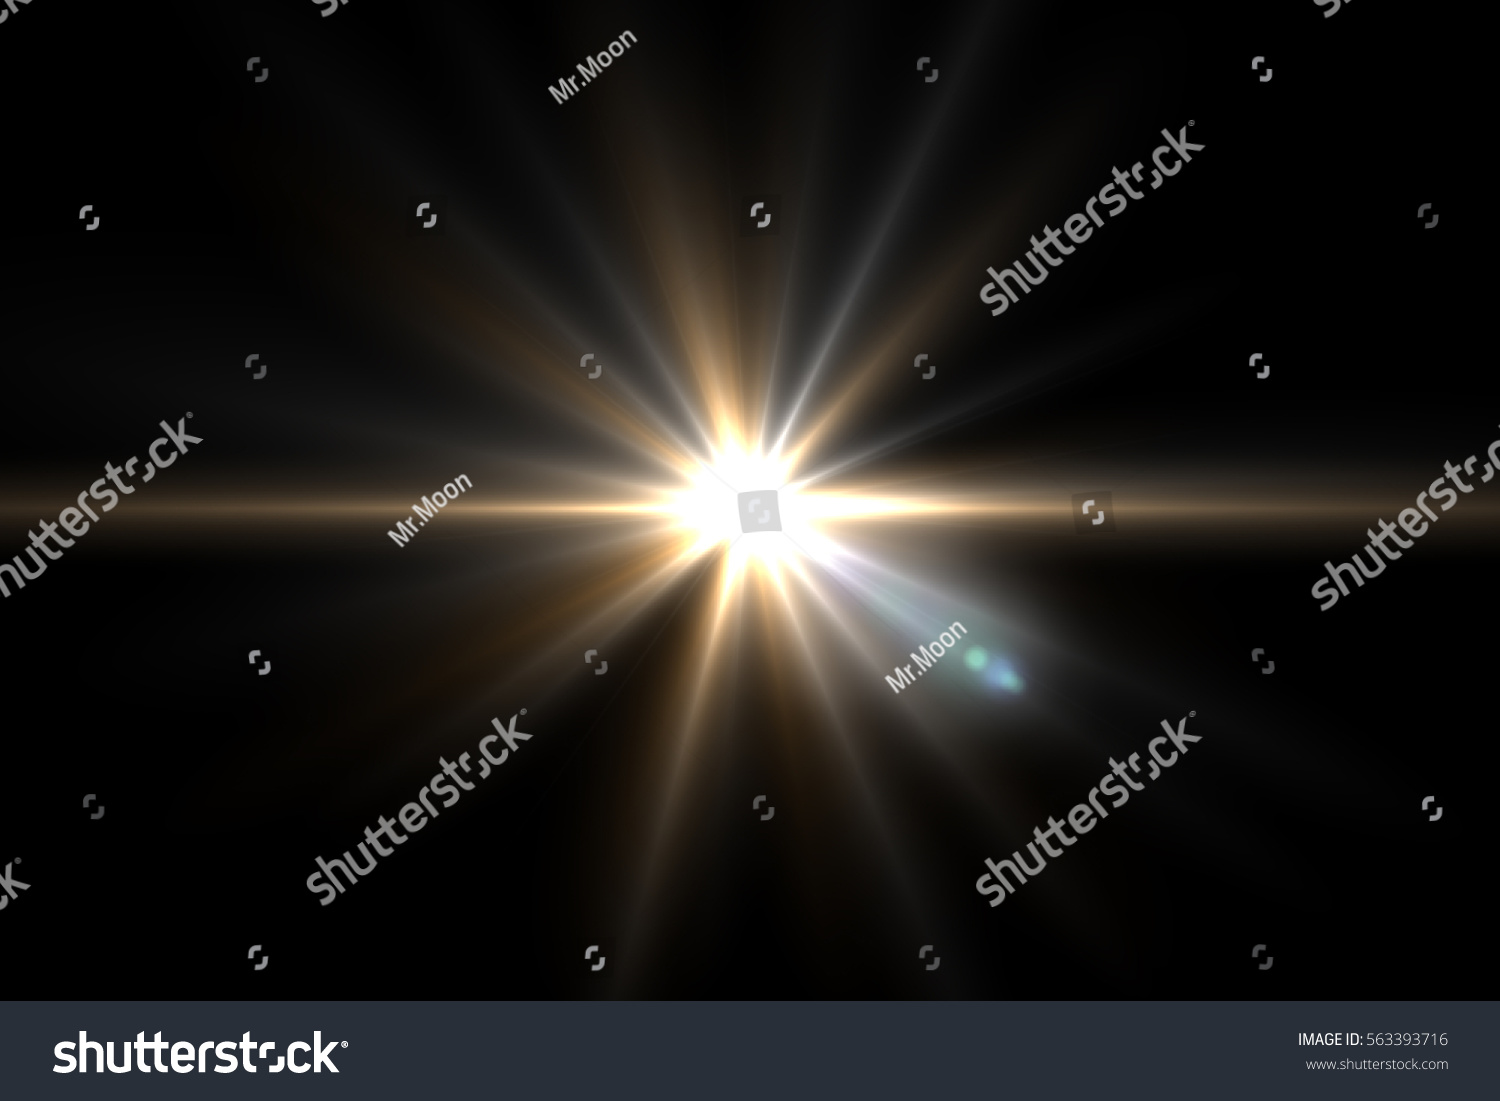 Abstract sun burst with digital lens flare background.Easy to add overlay or screen filter over Photos #563393716